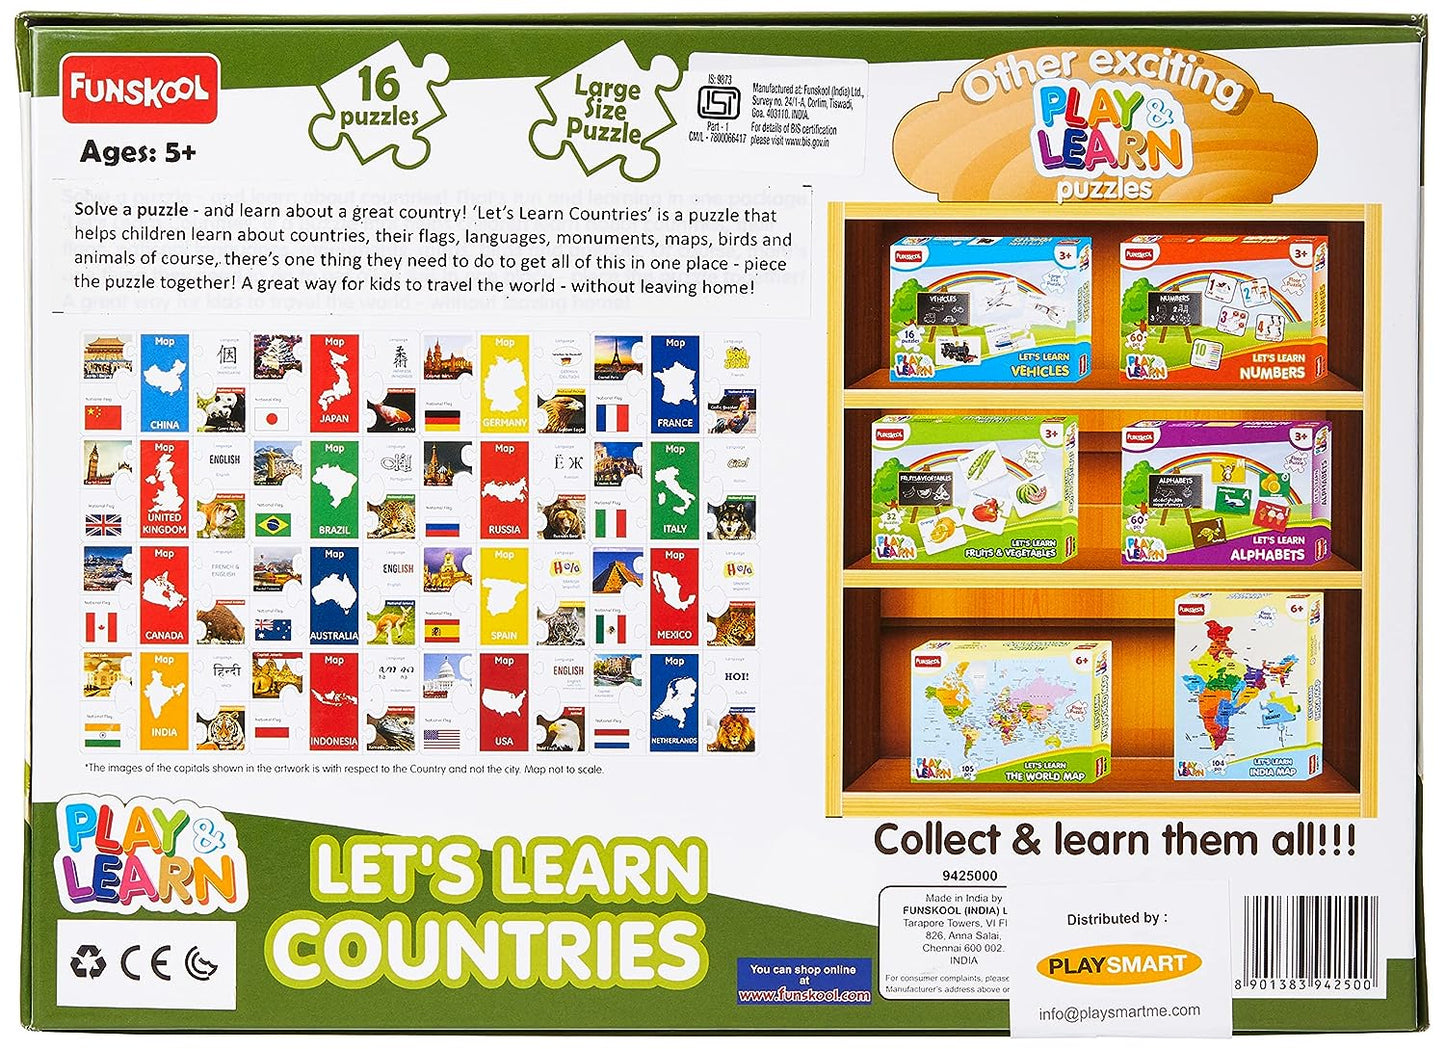 Funskool - Lets Learn Countries, 5+ Years Kids Educational & Learning Puzzle Game, Multicolor